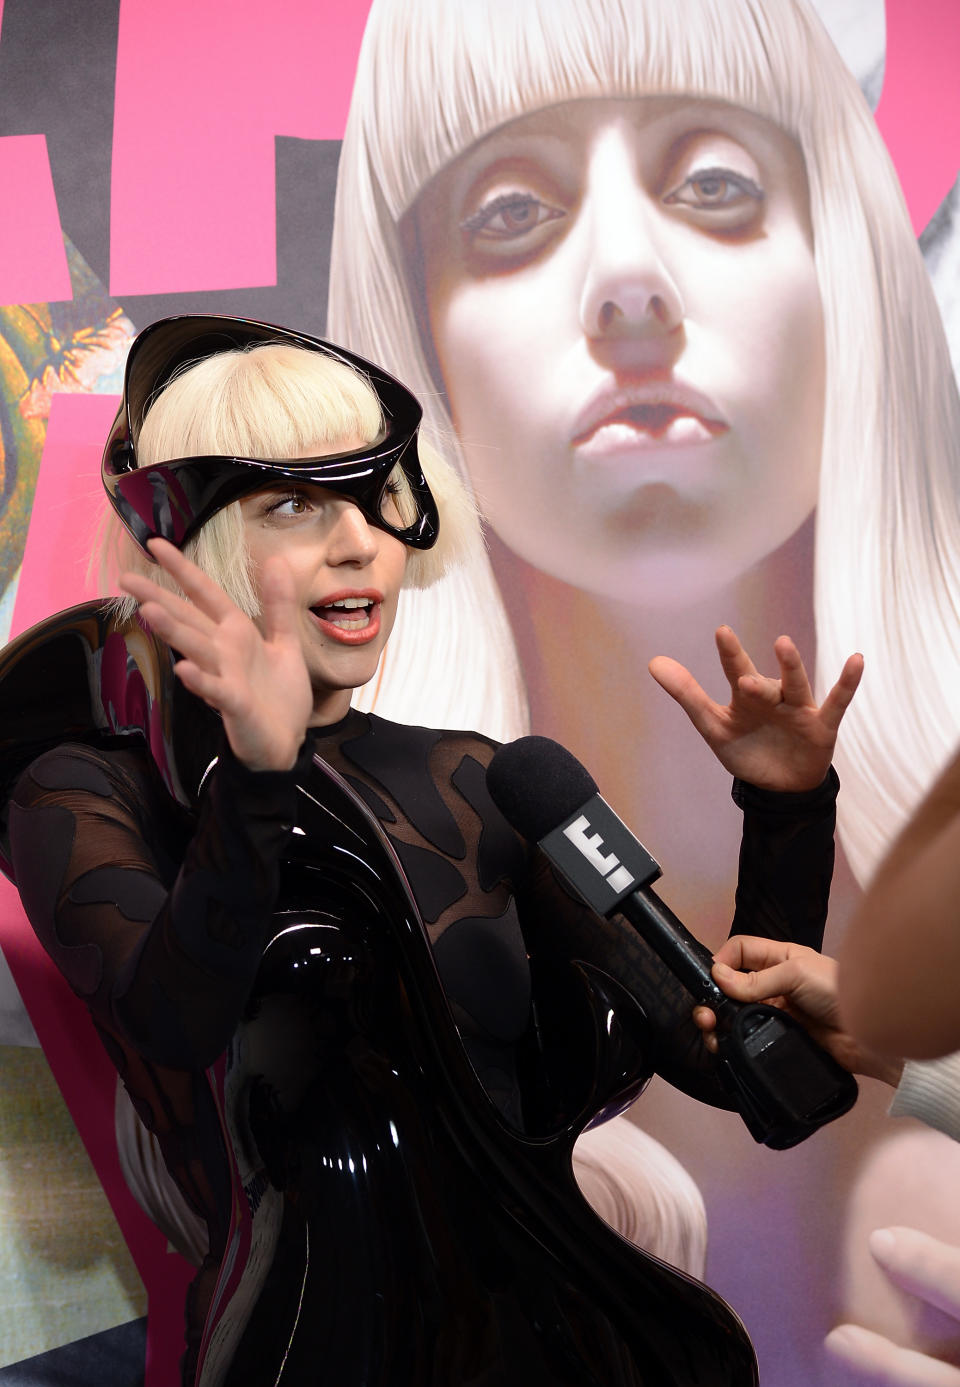 Singer Lady Gaga attends her ARTPOP album release and artRave event the Brooklyn Navy Yard on Sunday, Nov. 10, 2013 in New York City. (Photo by Evan Agostini/Invision/AP)